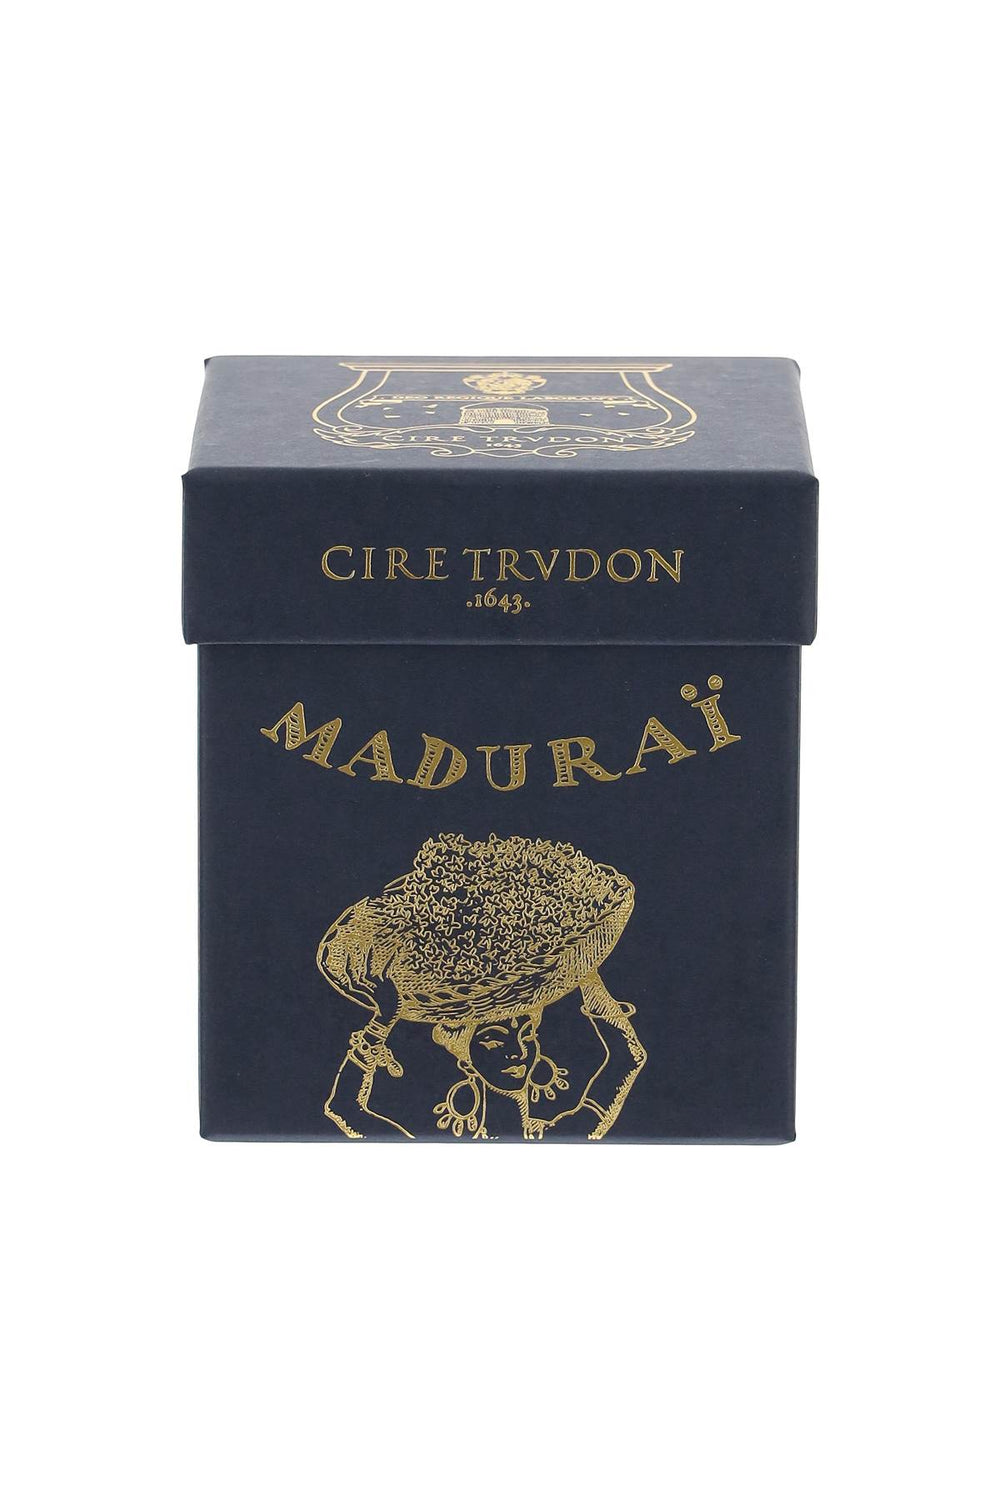 Cire trvdon madurai scented candle 270 gr-1